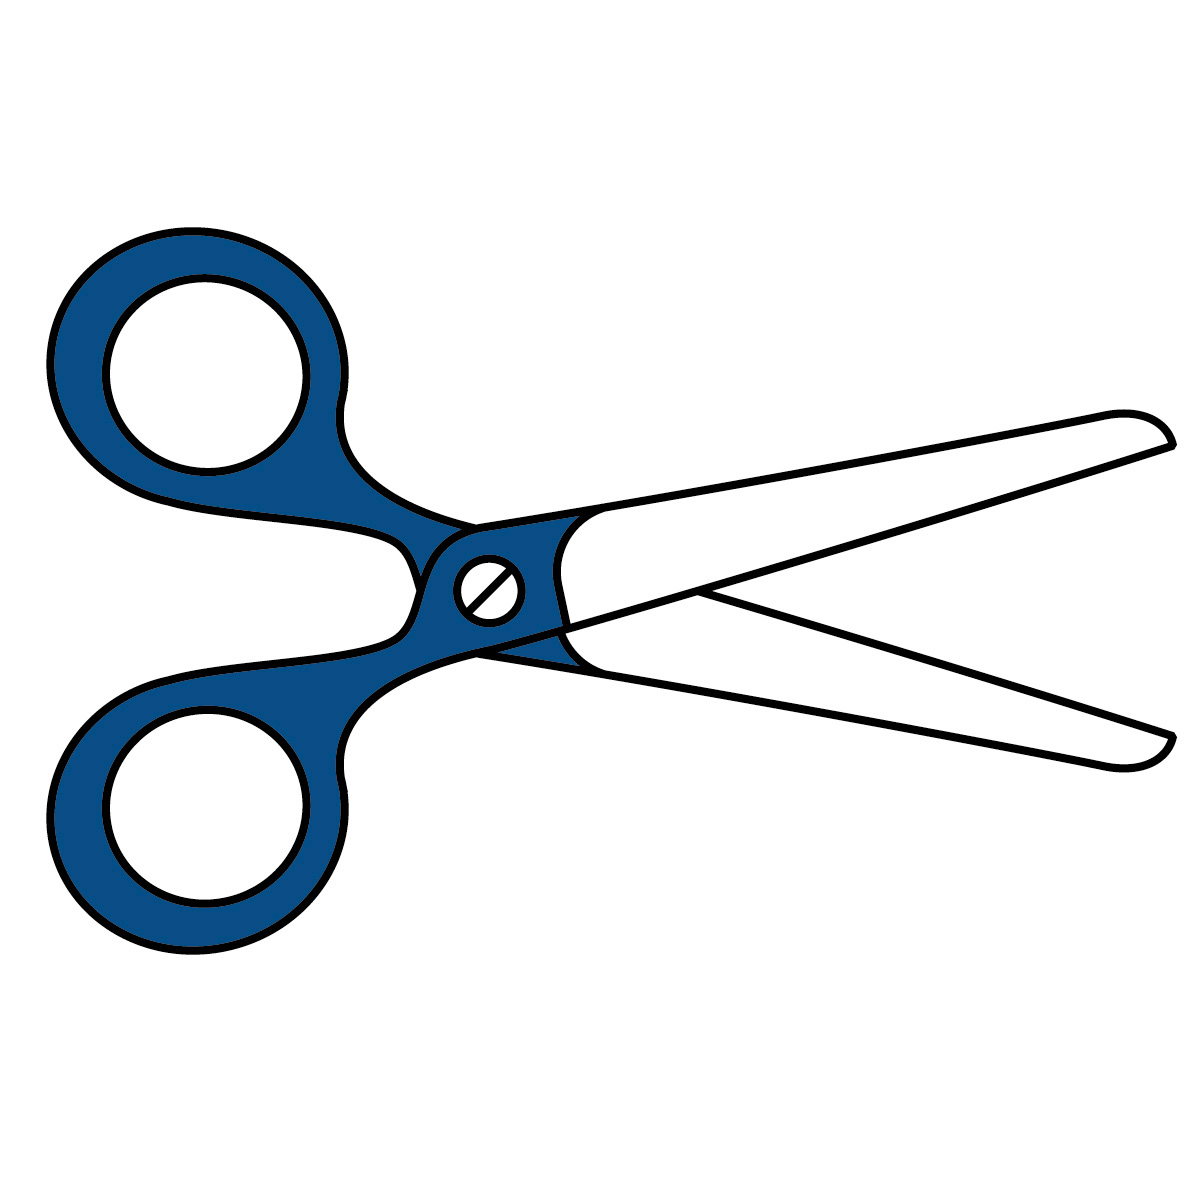 Scissors clipart black and white free clipart images 2